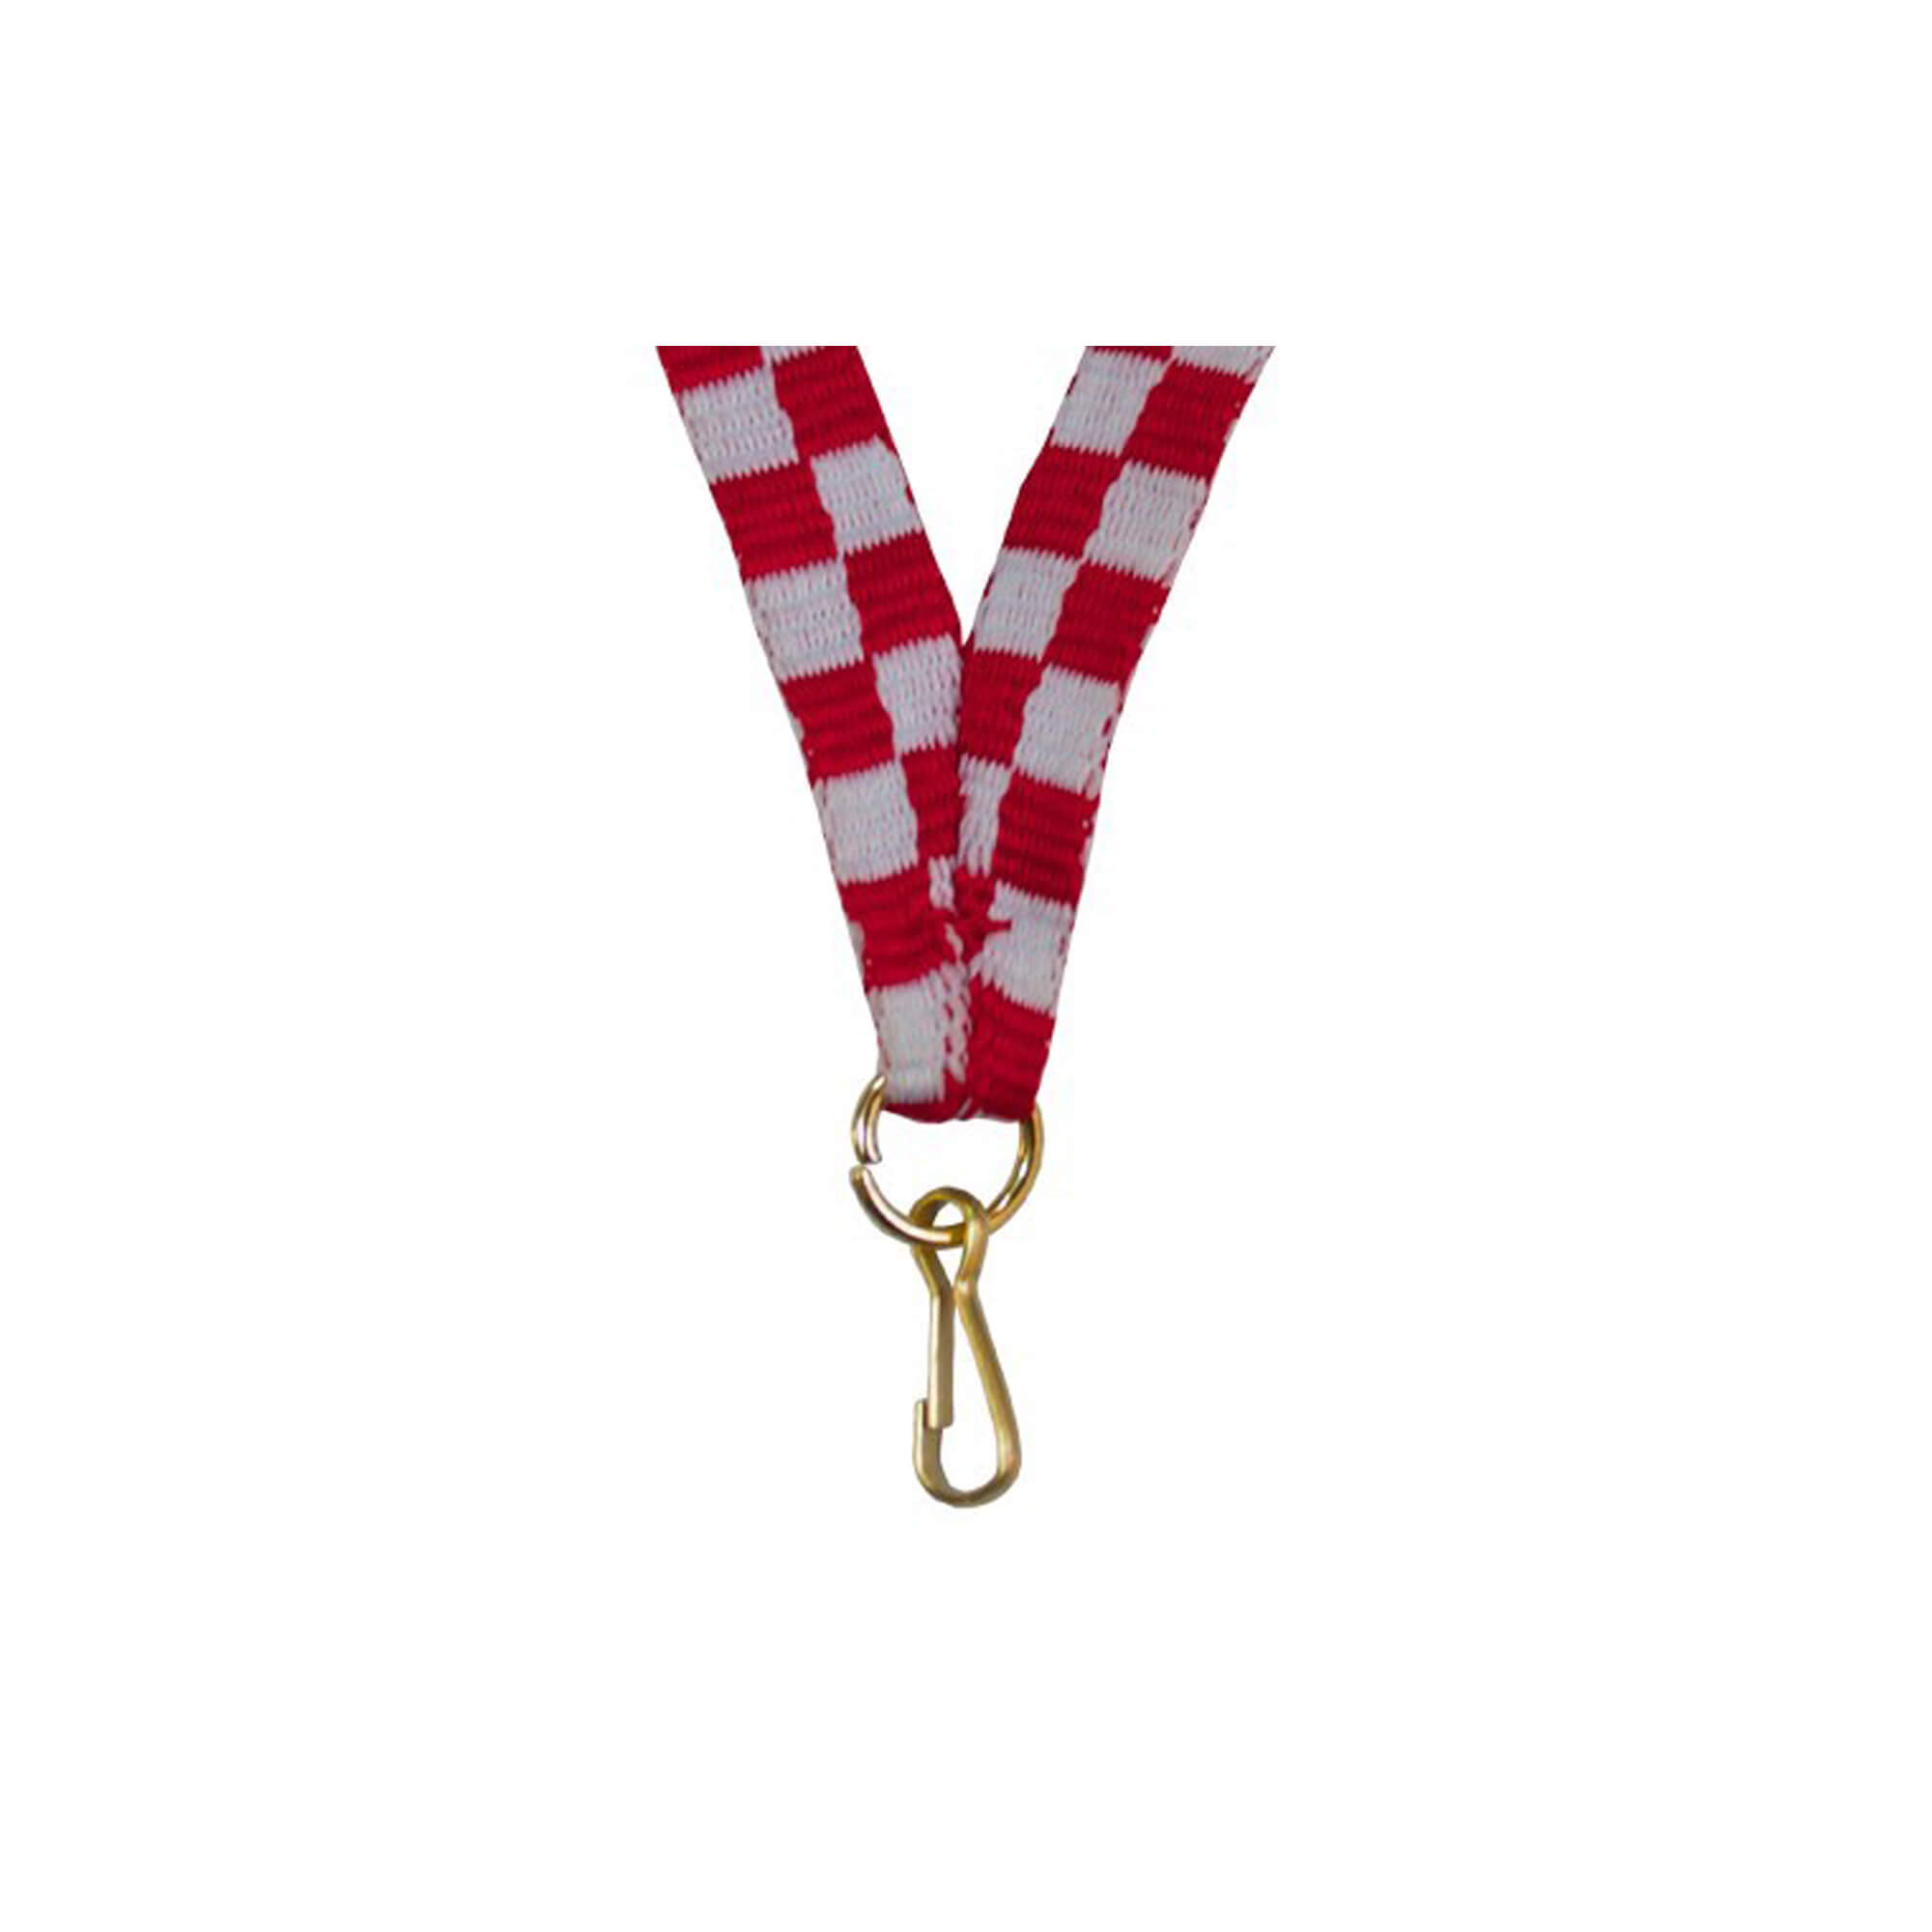 Medal ribbon 10 mm with ring, red and white checkered